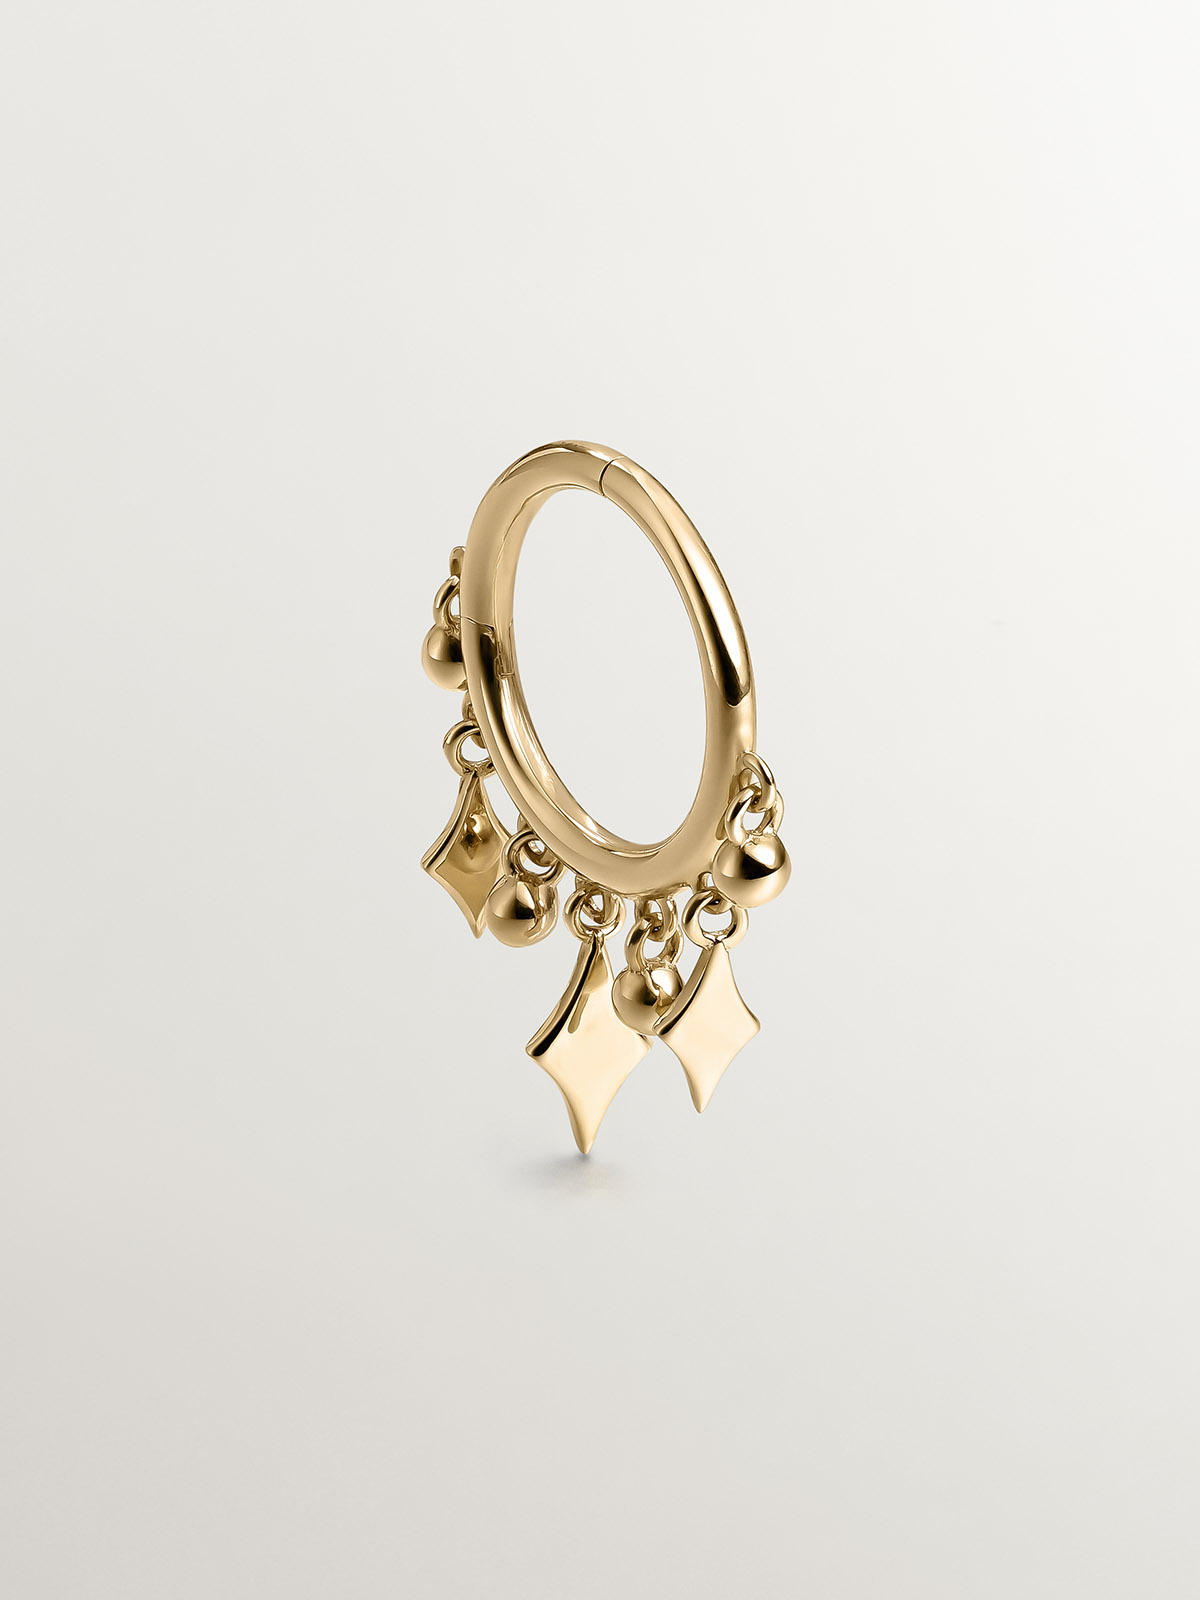 Individual 9K yellow gold hoop earring with spheres and diamonds.